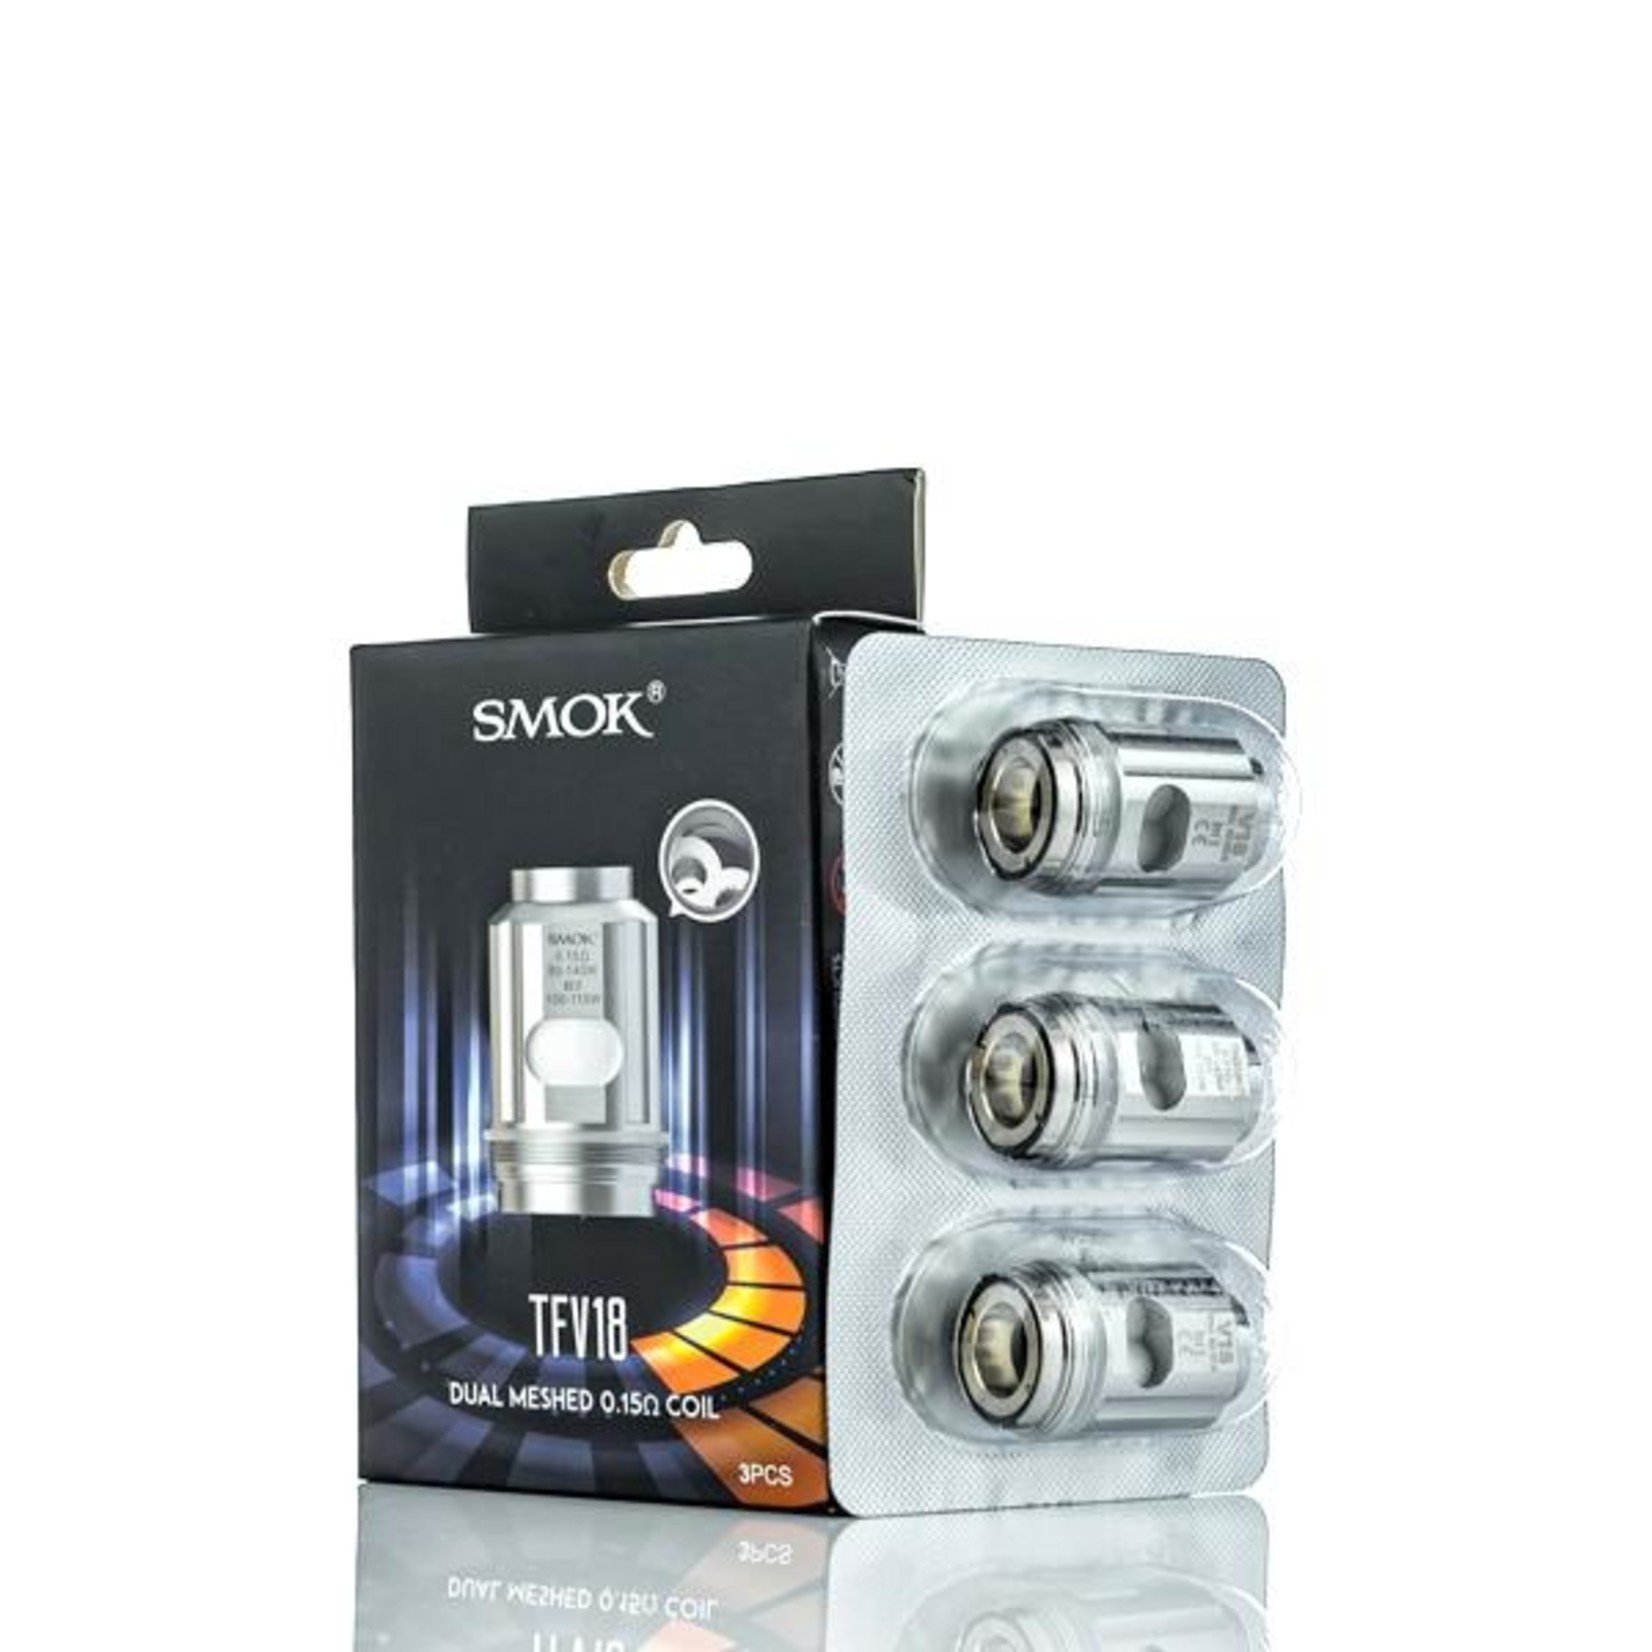 Smok TFV18 Replacement Coils Dual Meshed 0.15 ohm Pack ( 3pcs )